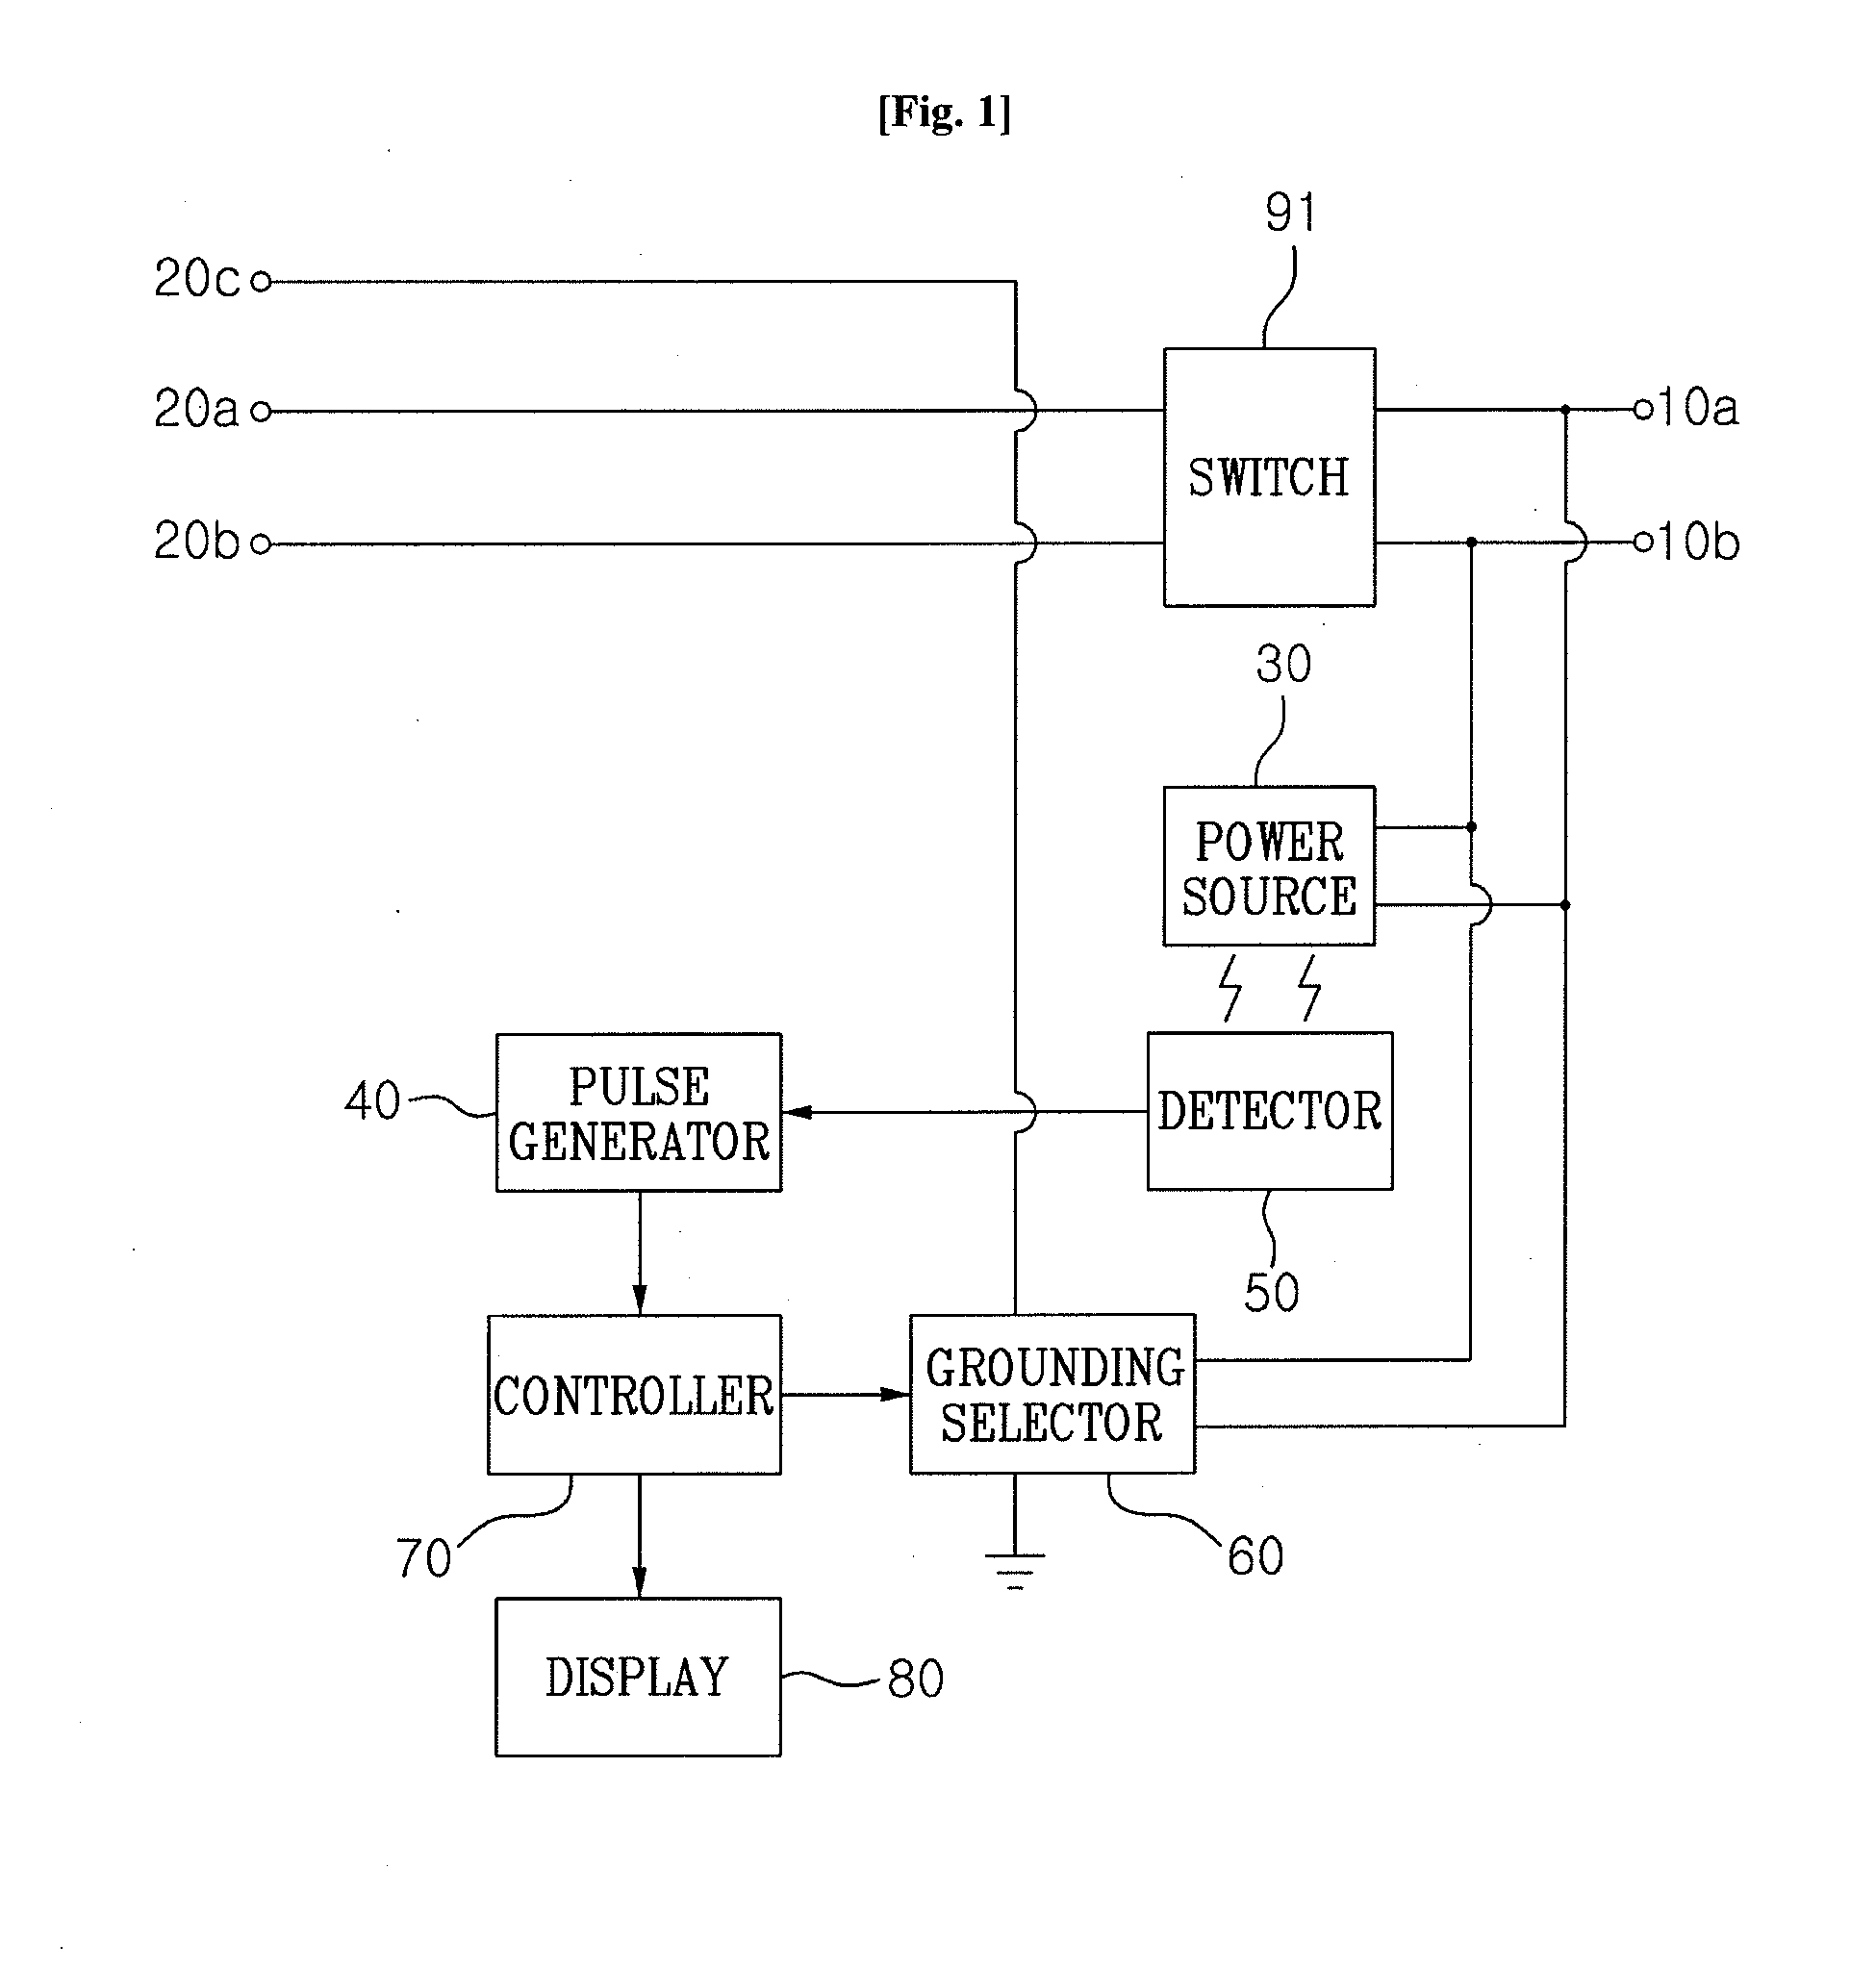 Apparatus for Adaptively Reducing Electromagnetic Wave